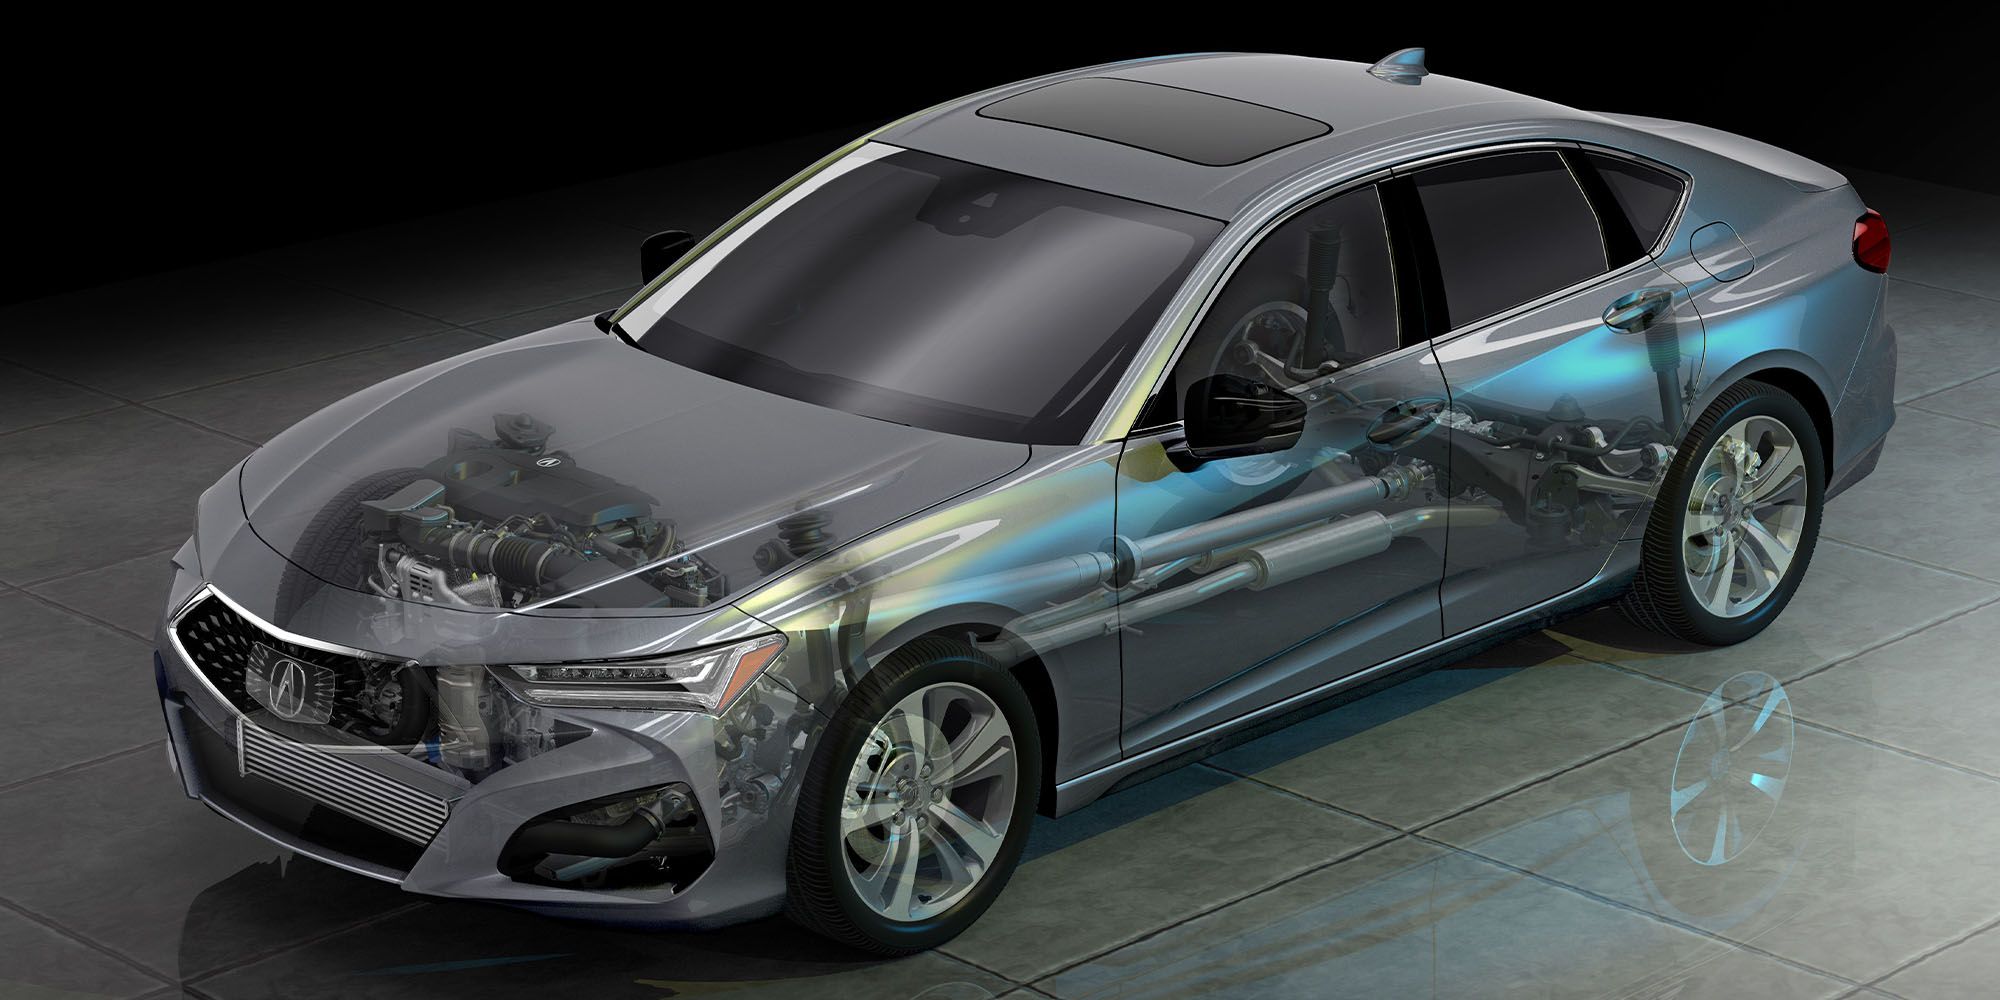 A cutaway of the TLX's chassis